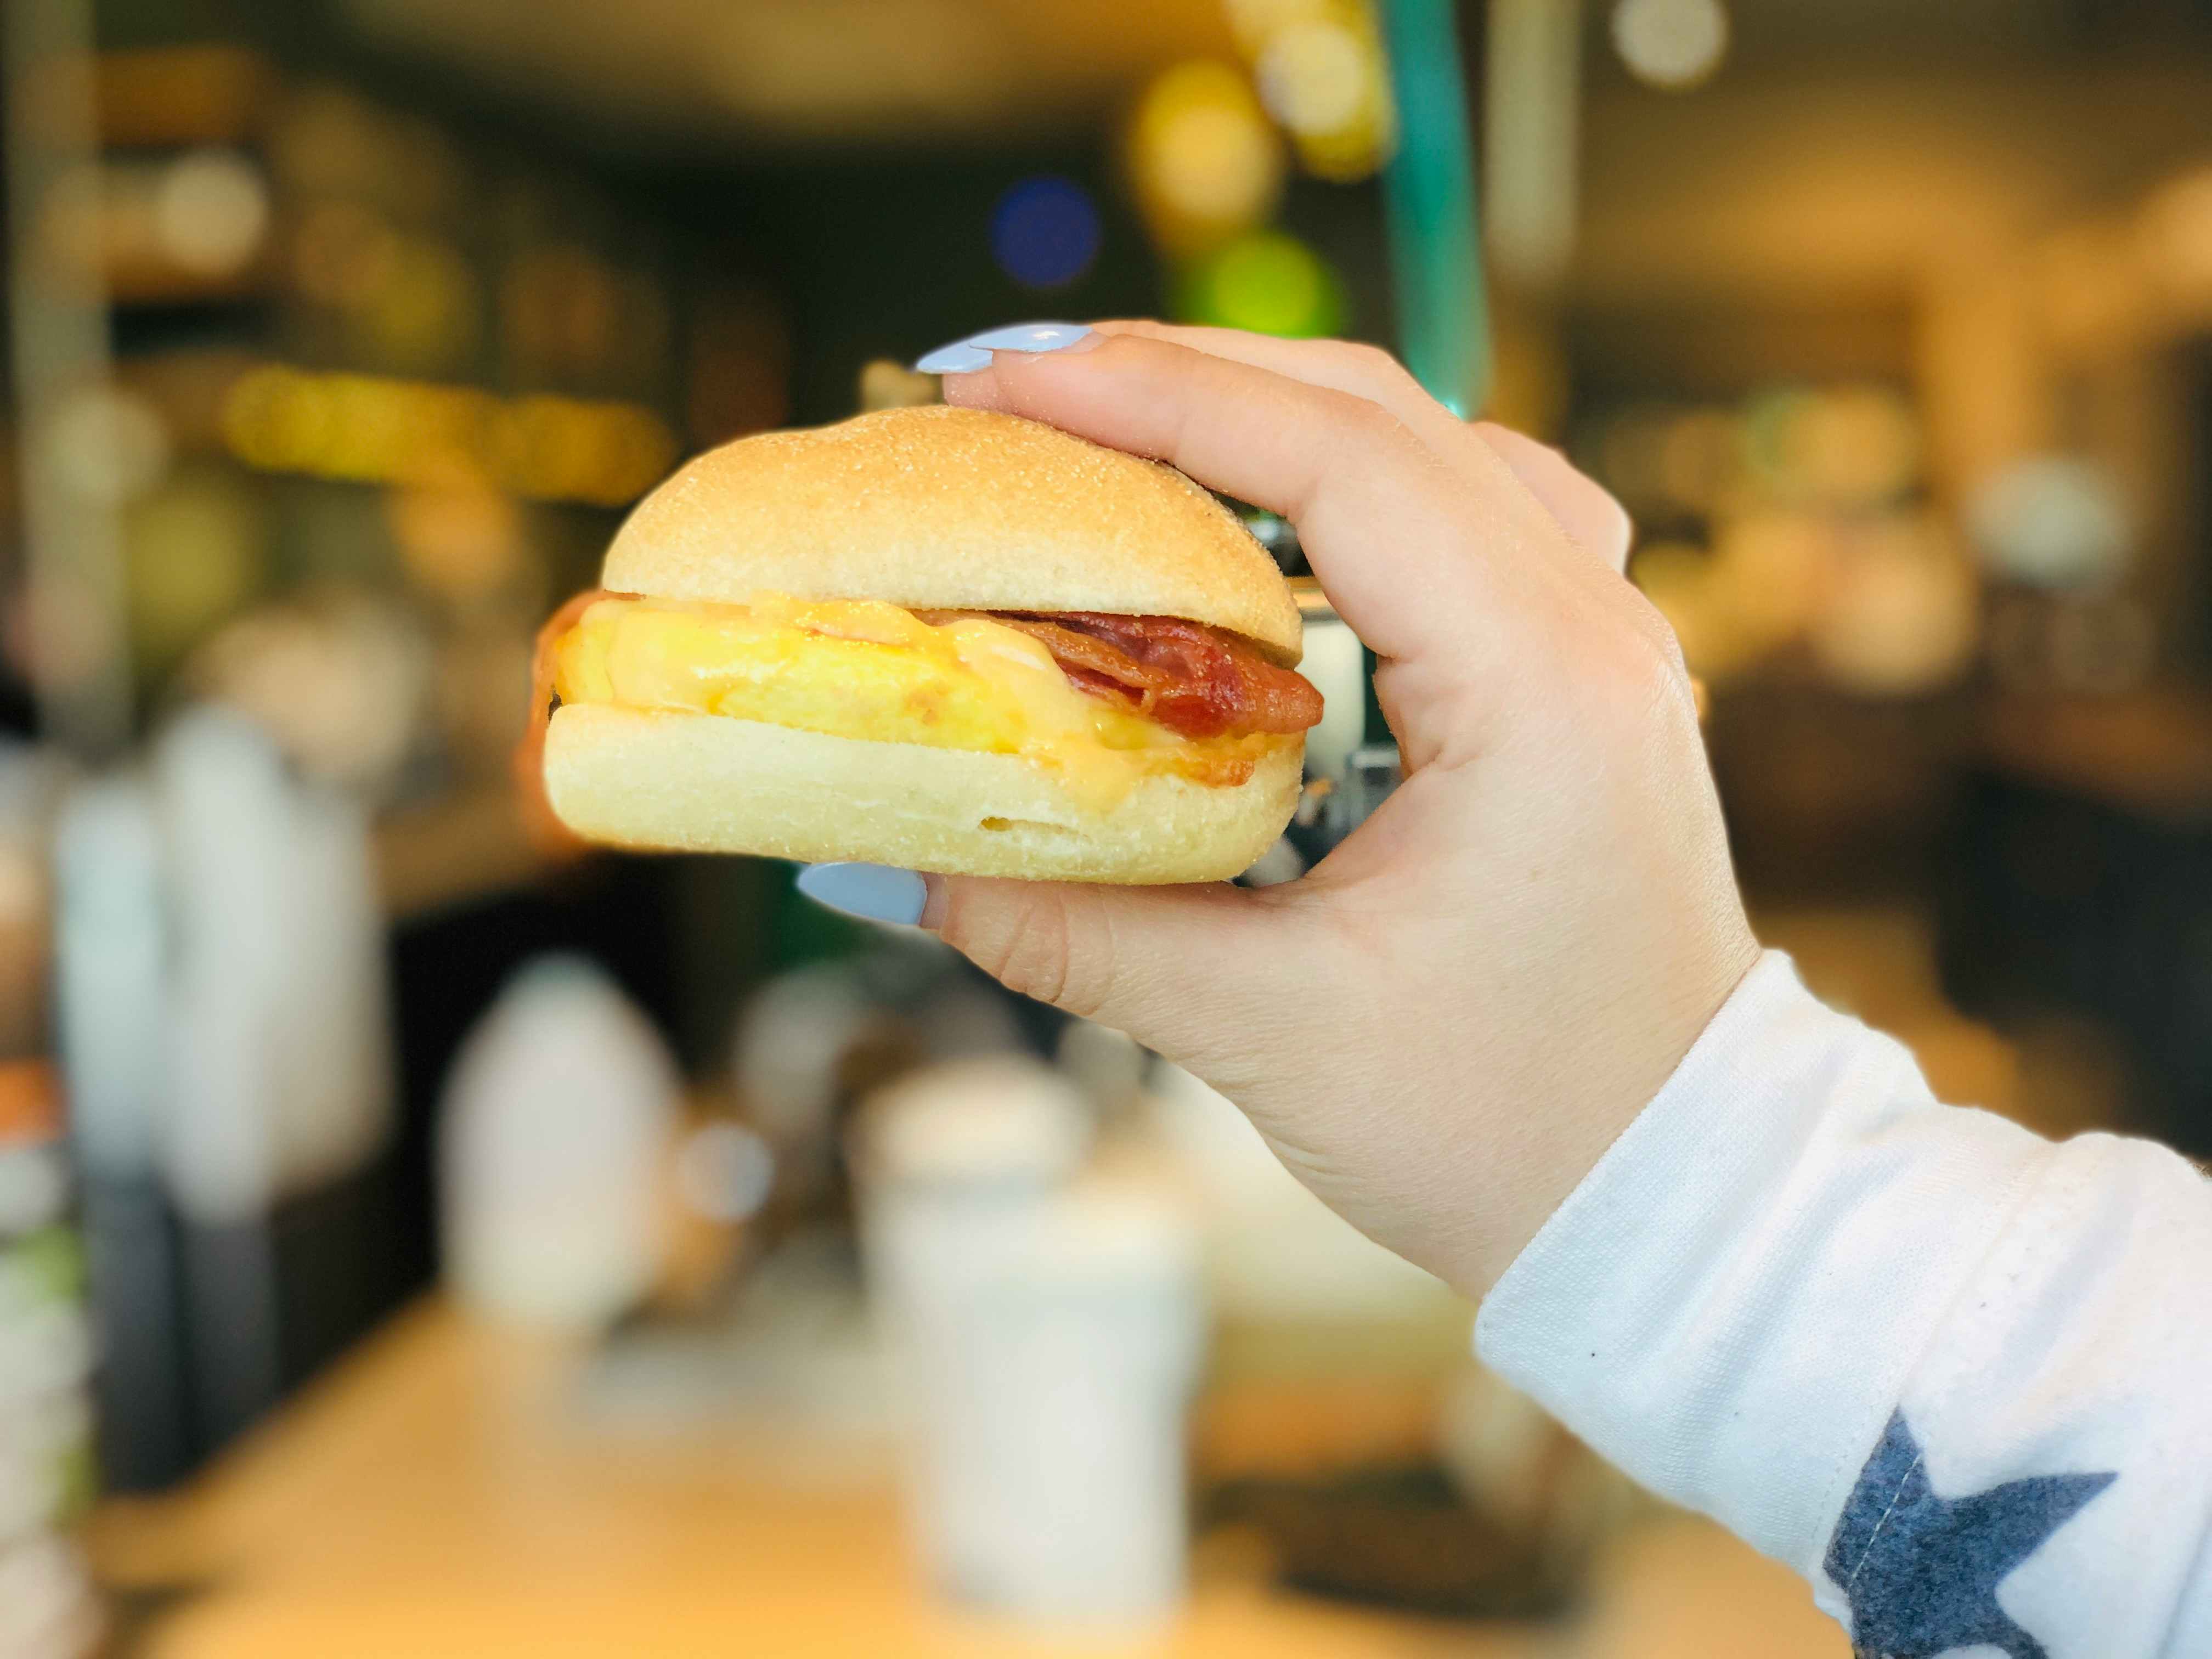 A person's hand holding up a Starbucks breakfast egg bacon sandwich.